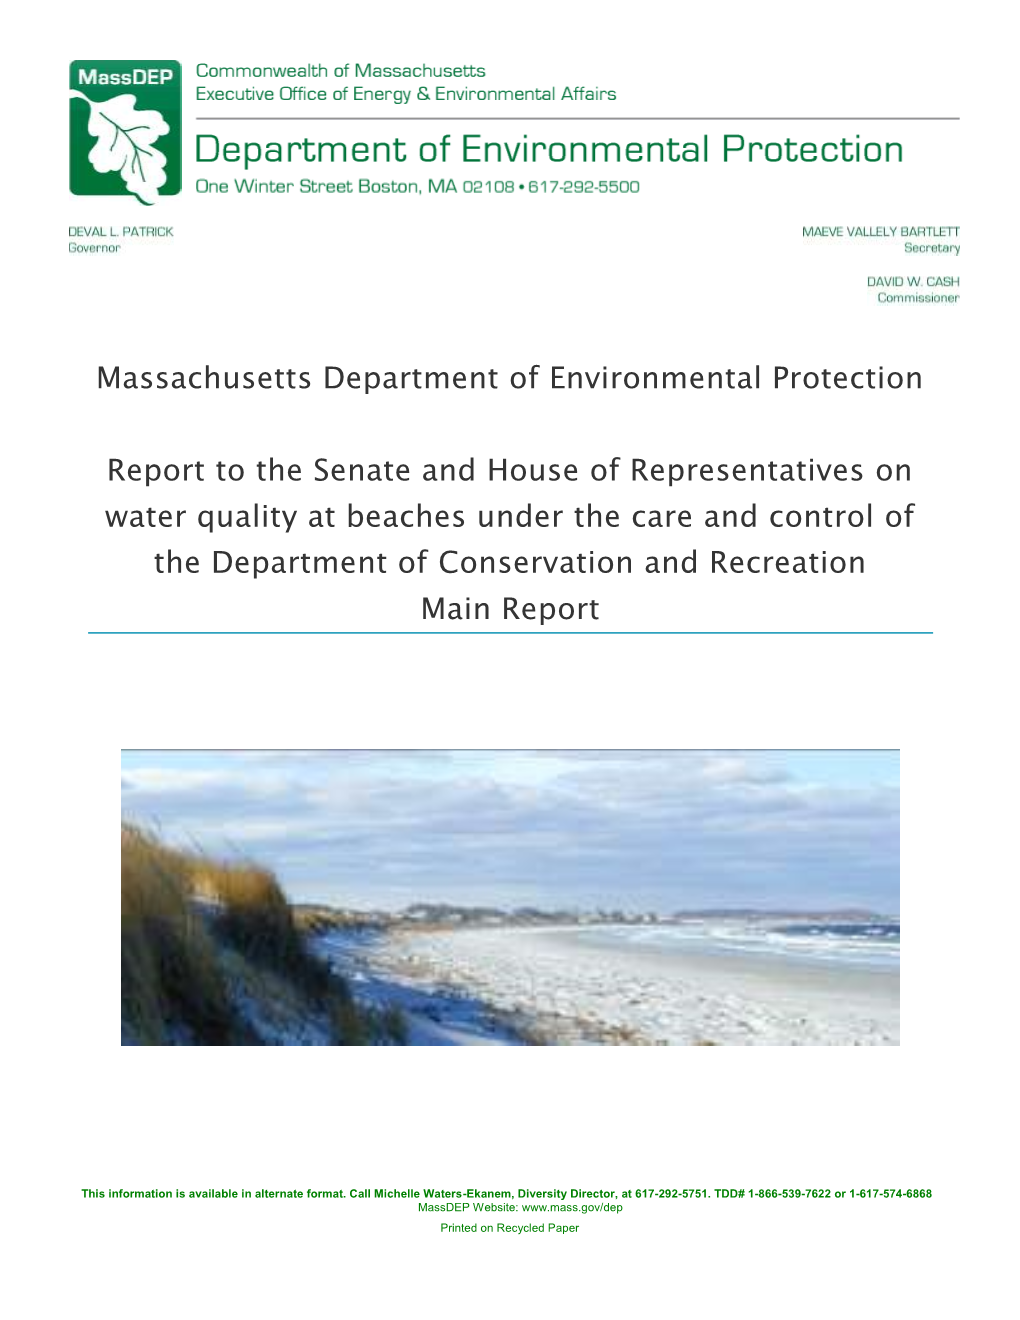 Massachusetts Department of Environmental Protection Report To